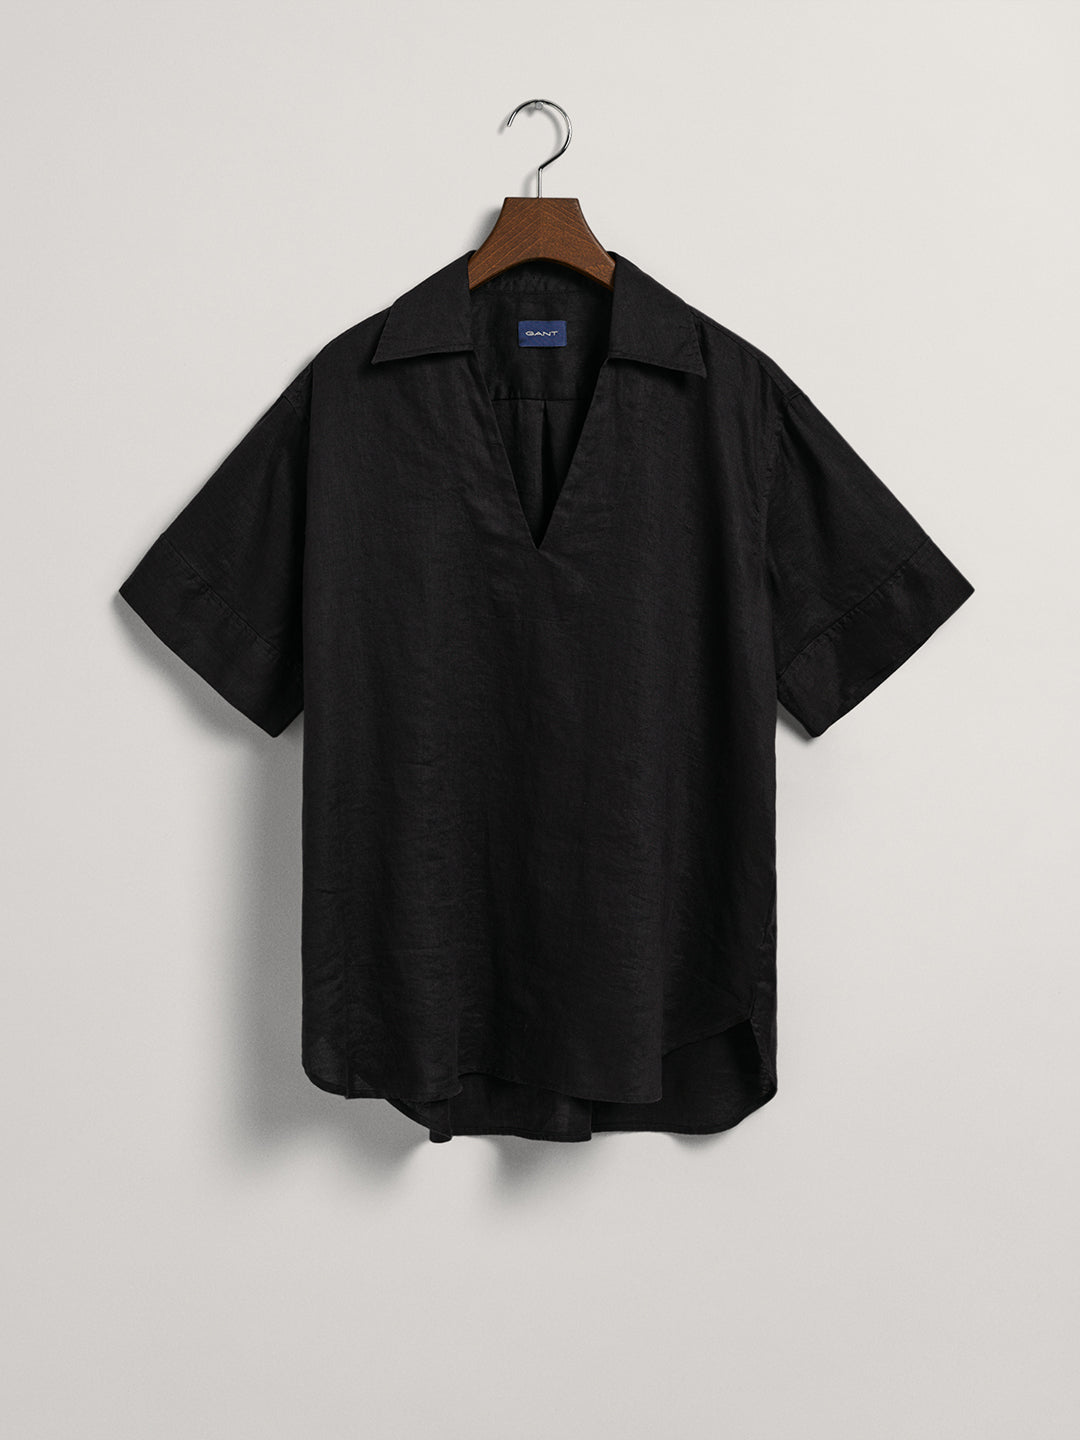 Gant Black Preppy Relaxed Fit Top